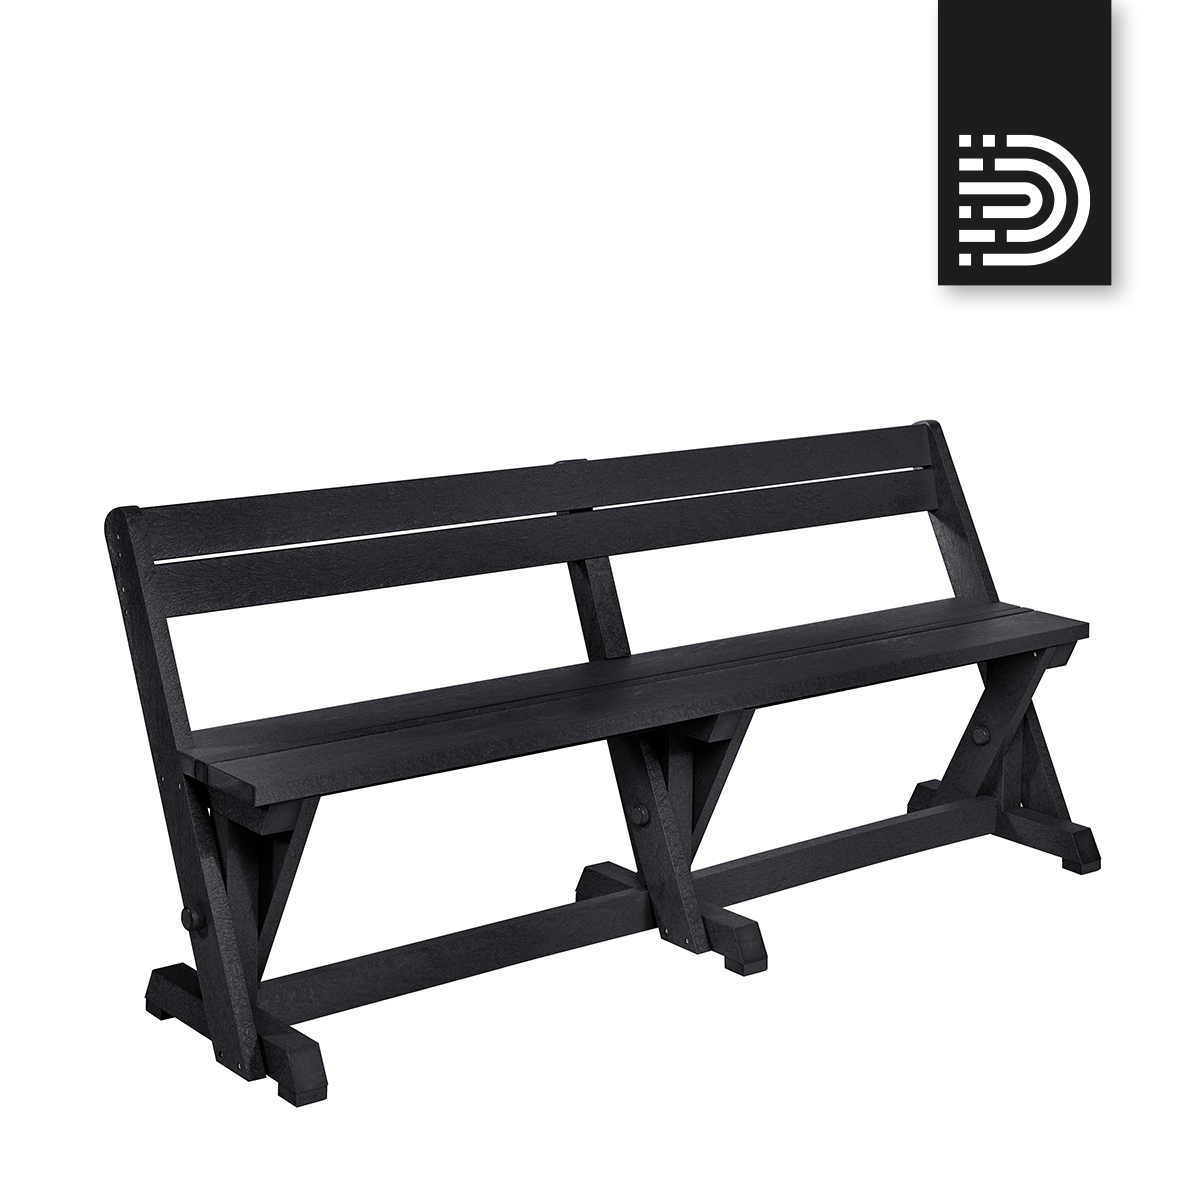 B202 Dining Tabel Bench with back - black 14